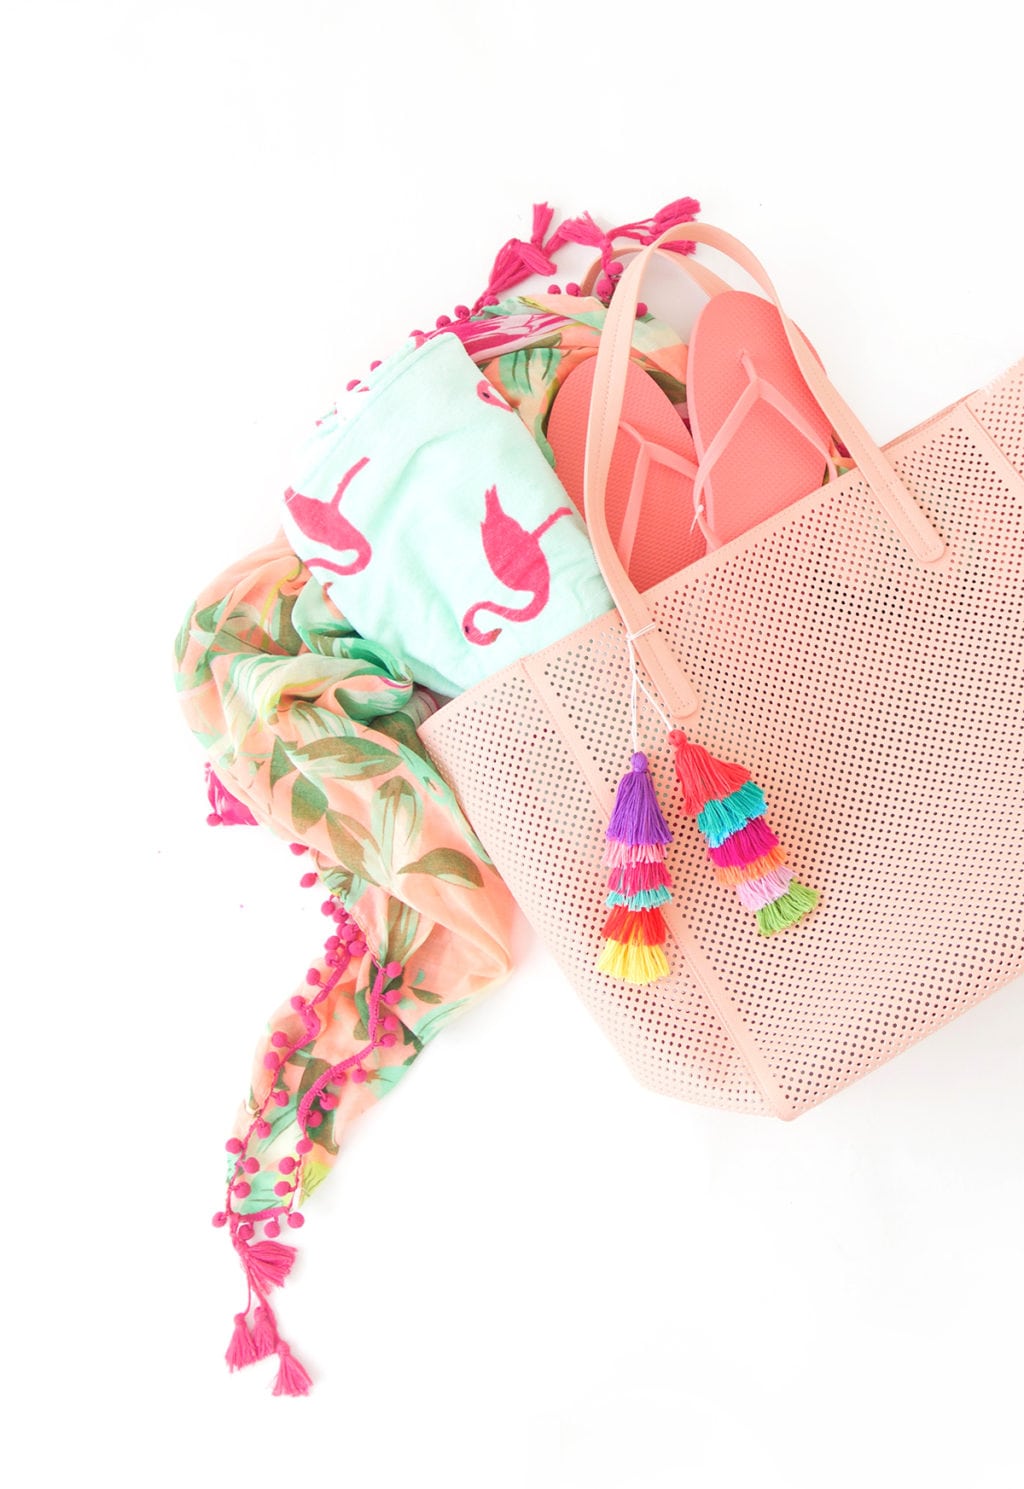 Use embroidery floss to create bold DIY tiered tassels for your beach tote.